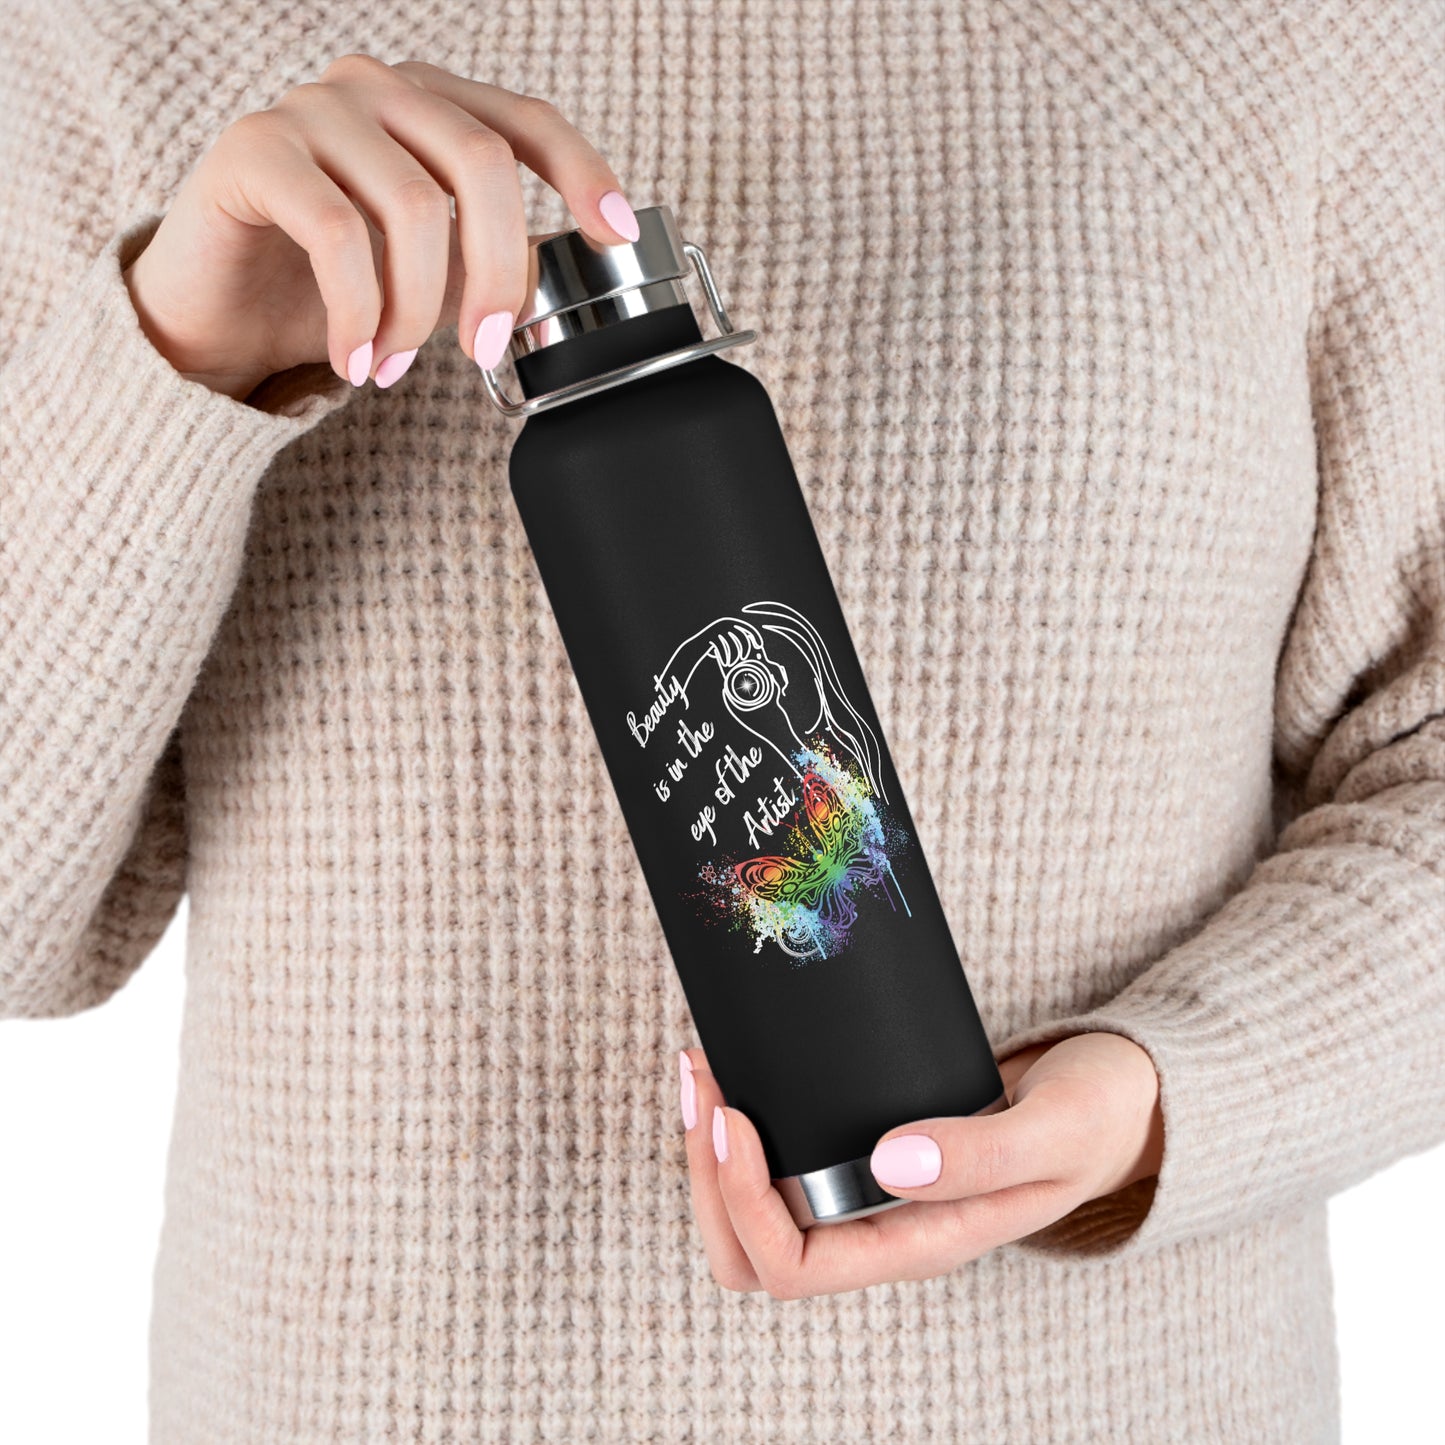 Copper Vacuum Insulated Bottle, 22oz : Art is in the eye